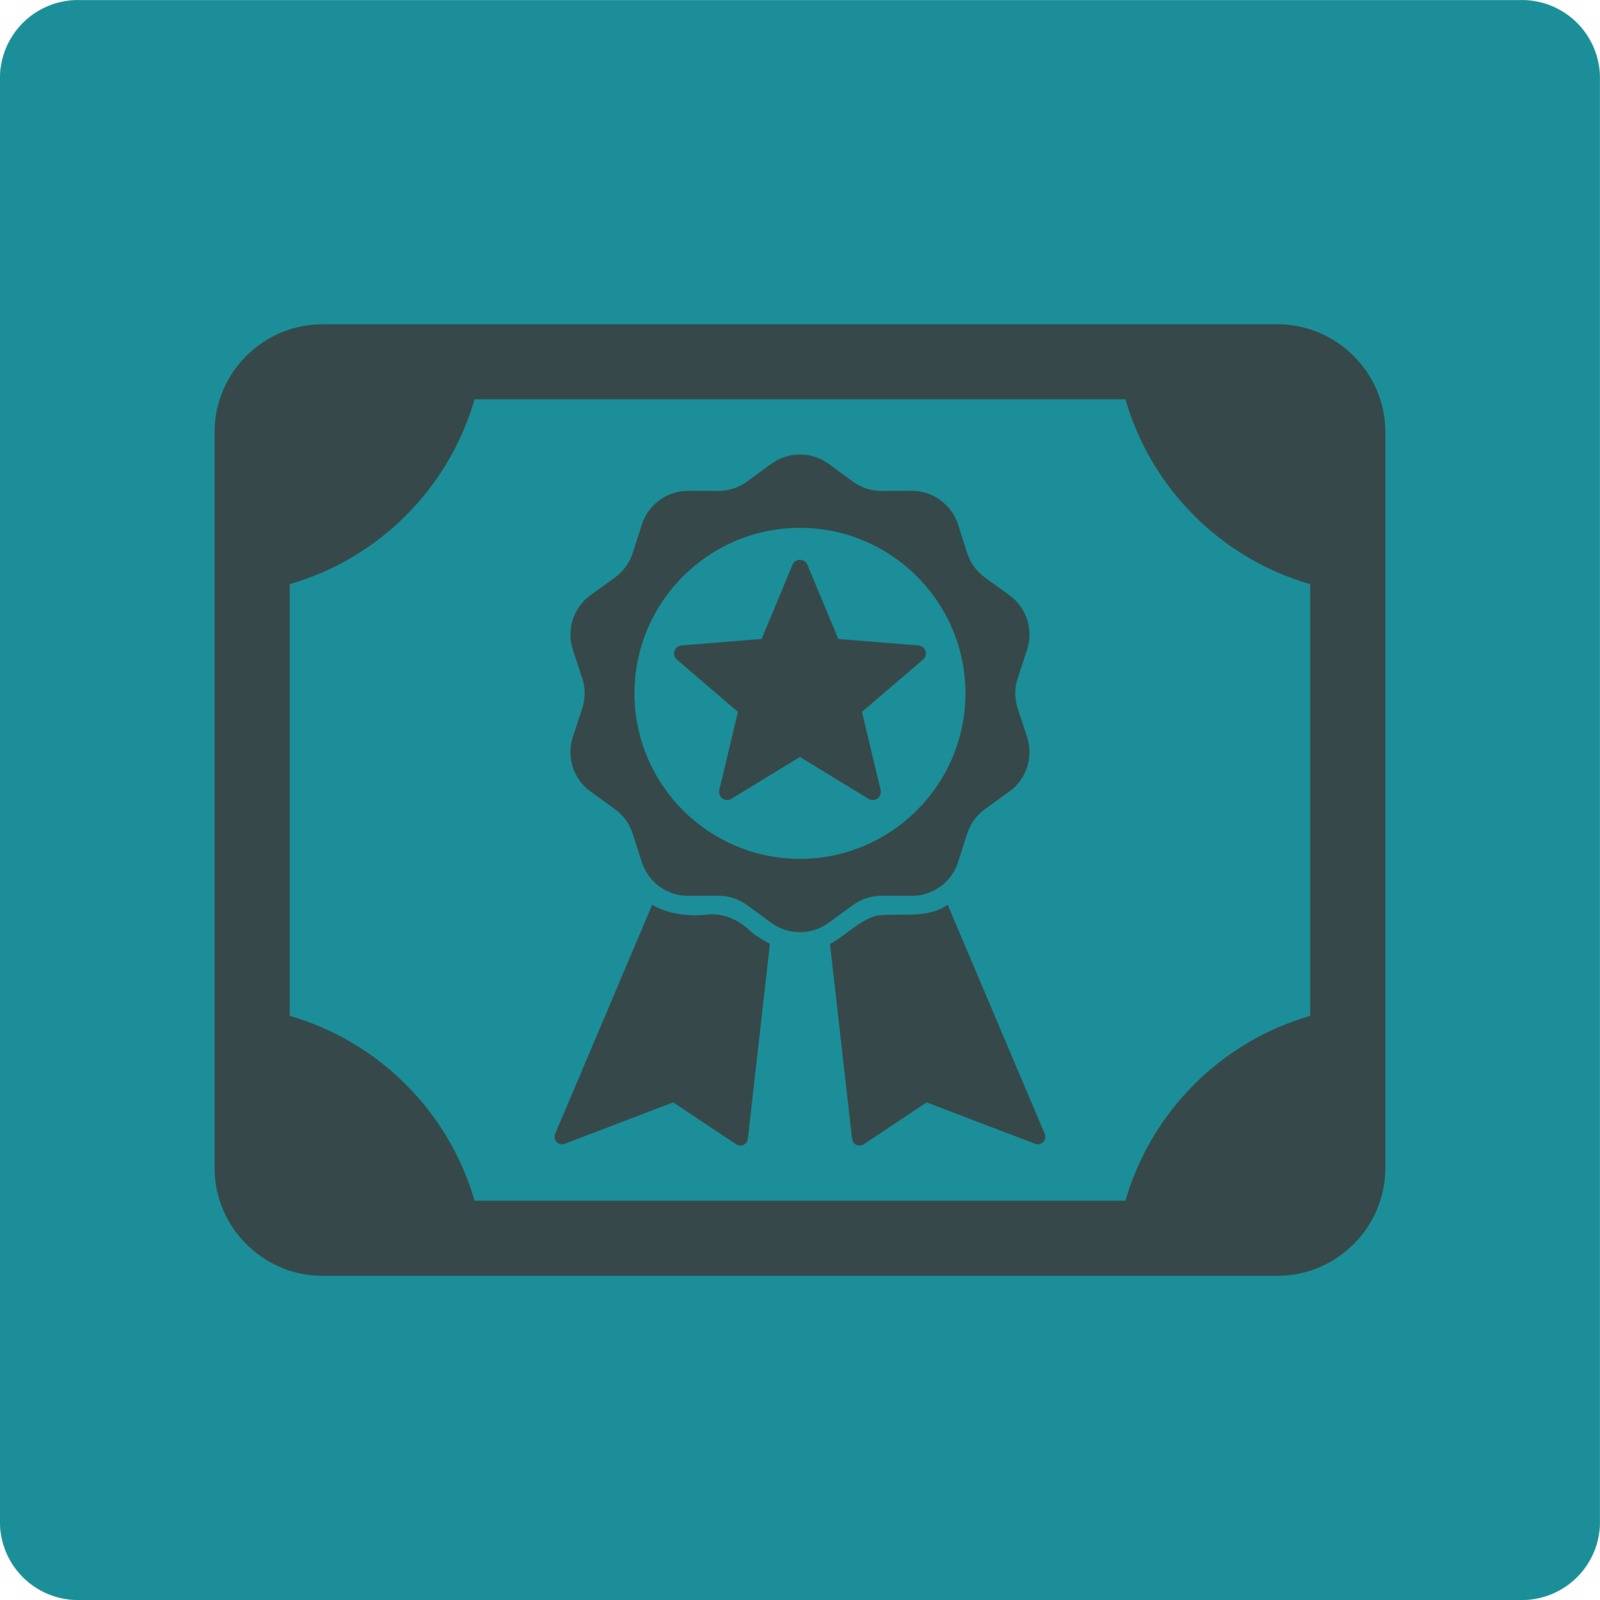 Certificate icon. Vector style is soft blue colors, flat rounded square button on a white background.